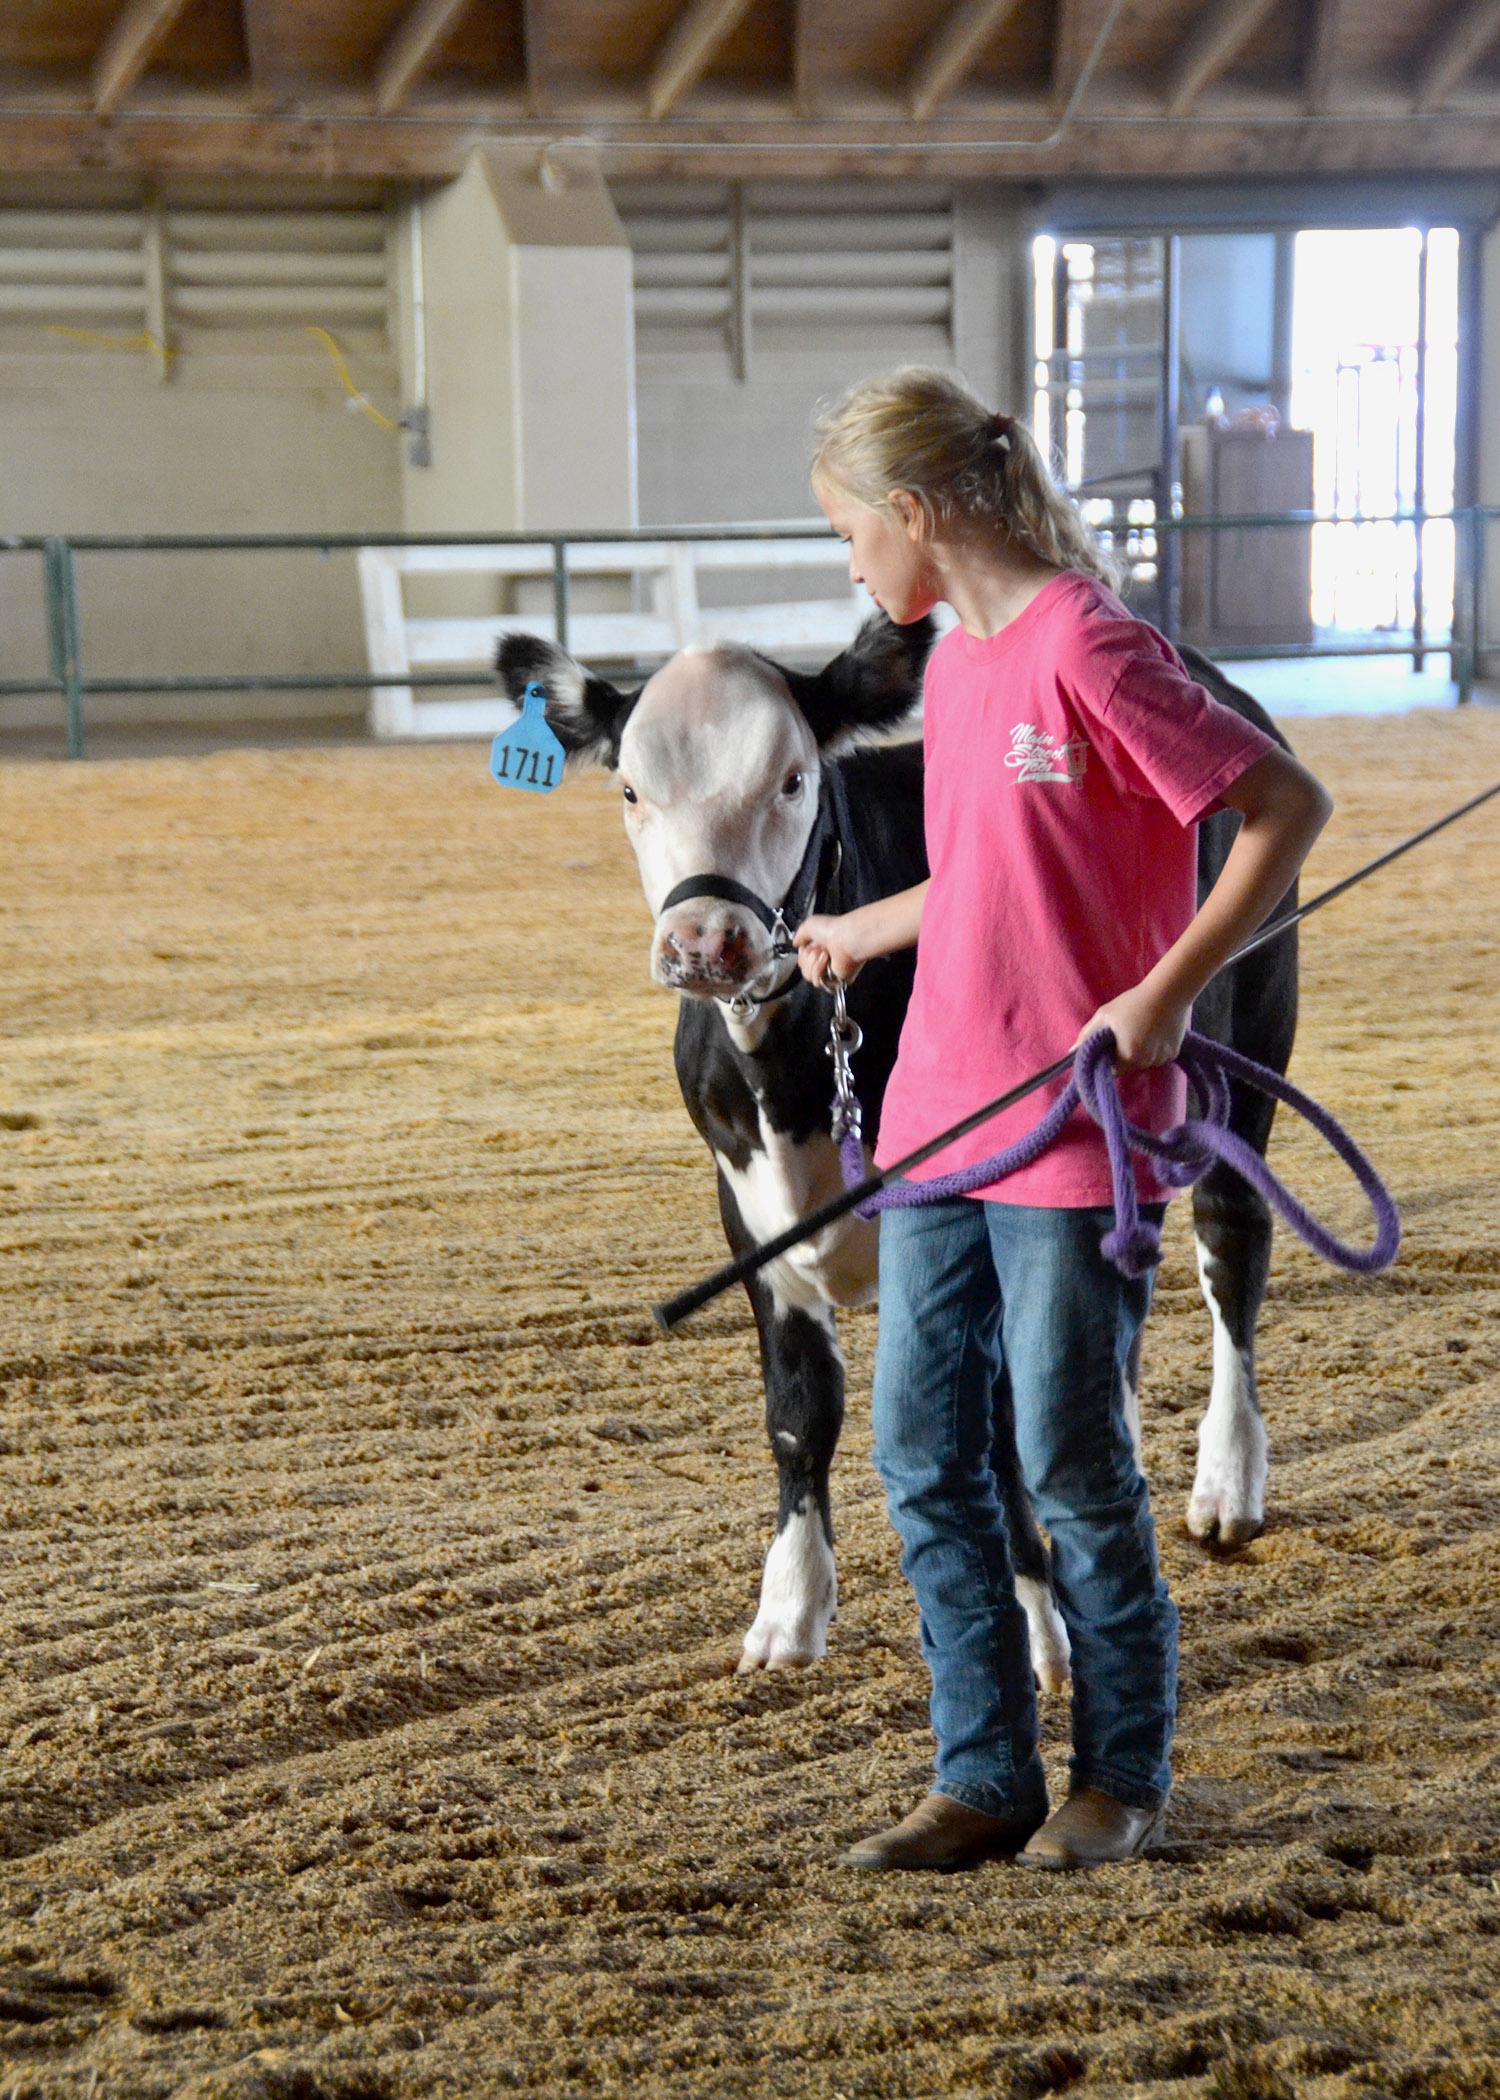 Simpson County 4-H’er Madisyn Lee prepares for the beef showmanship competition at the Mississippi State Fair with a few practice rounds in the ring Oct. 4. (Photo by MSU Ag Communications/Susan Collins-Smith)